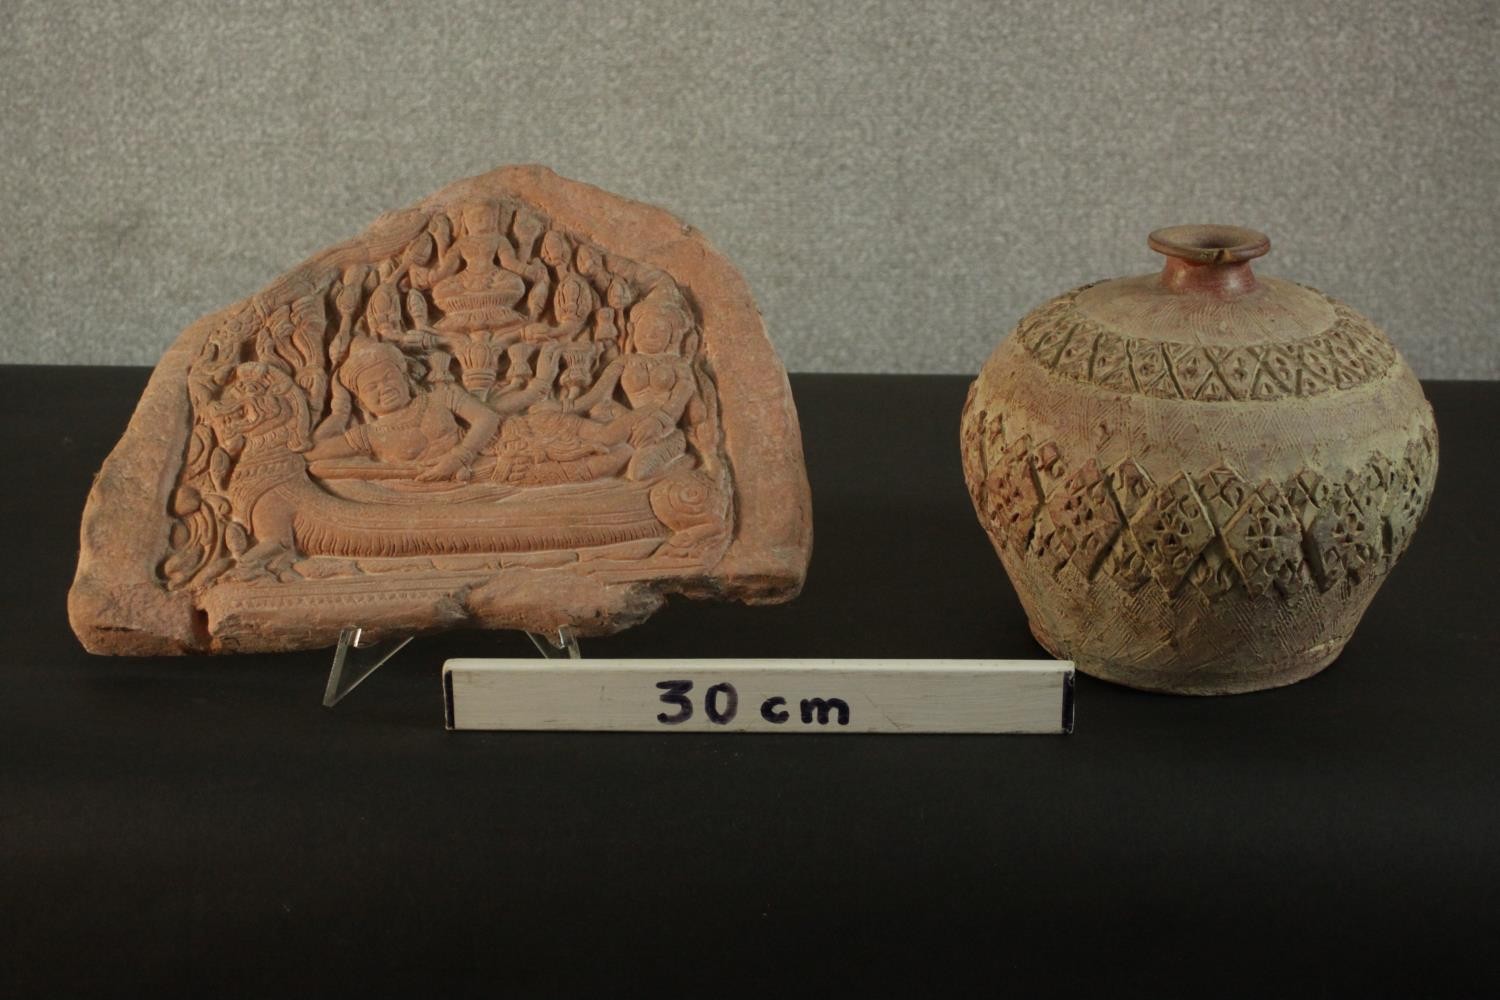 A relief clay tablet depicting Indian deities along with a ceramic vase with incised geometric - Image 2 of 9